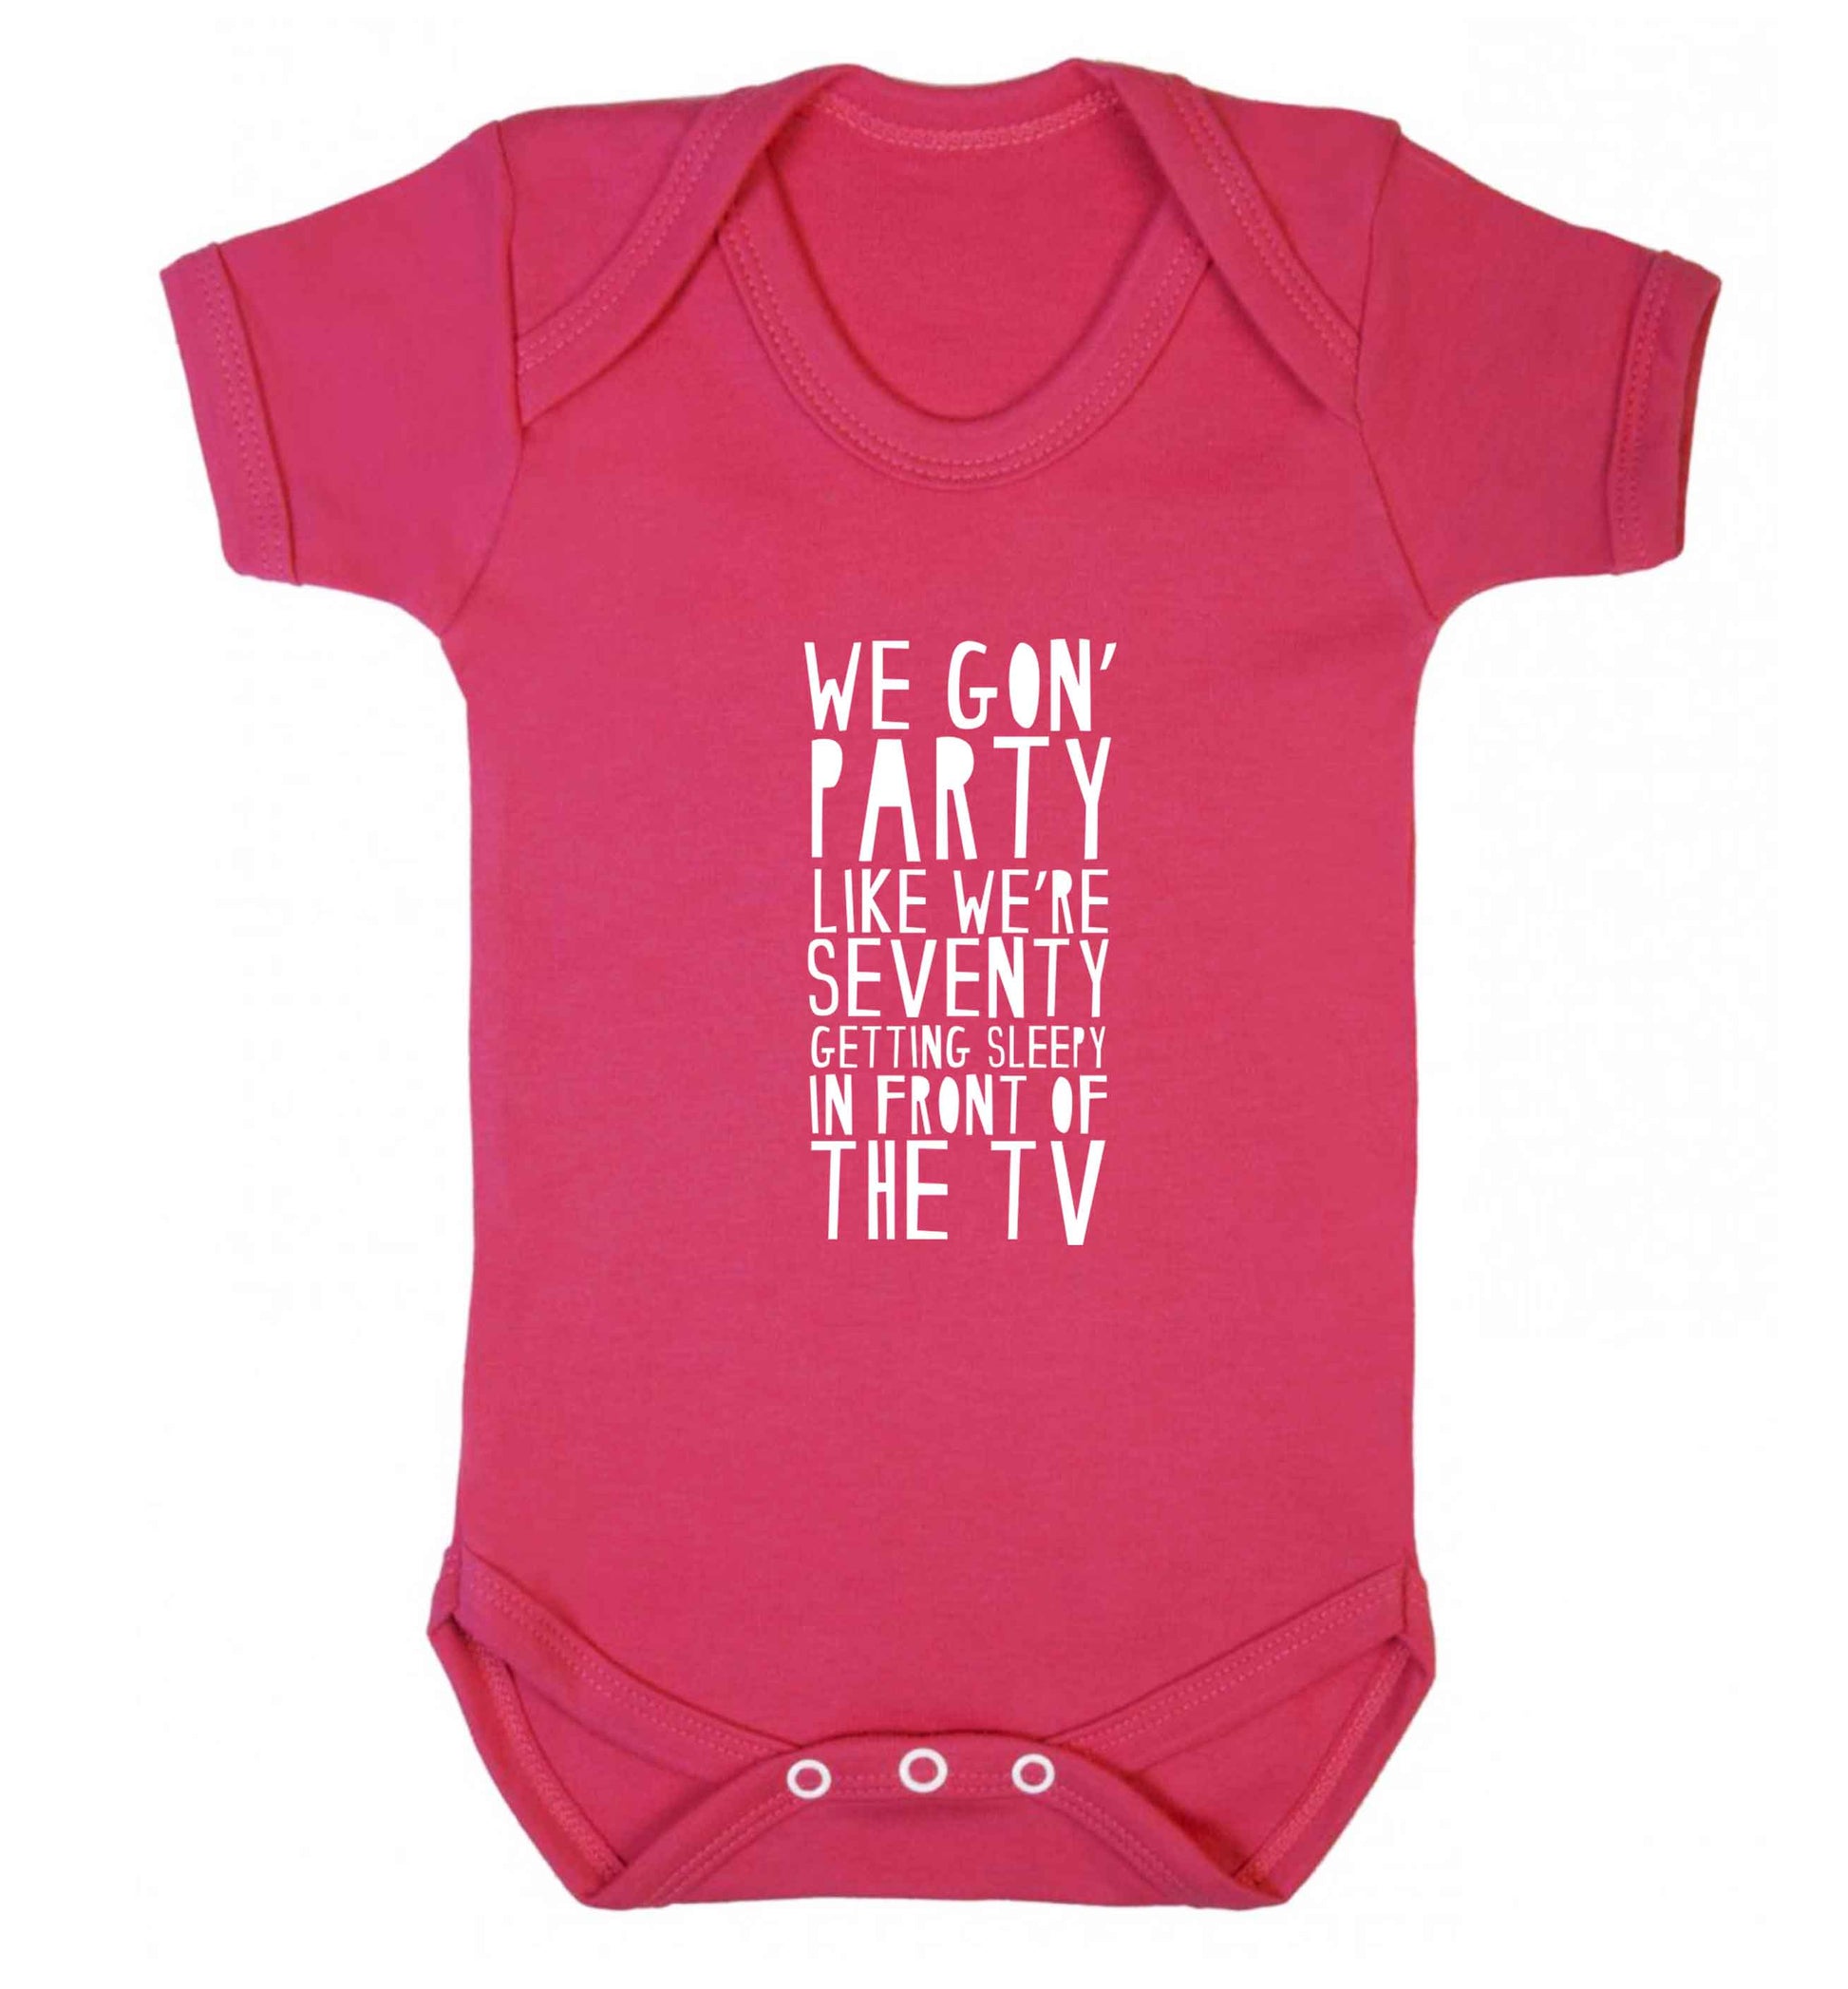 We gon' party like we're seventy getting sleepy in front of the TV baby vest dark pink 18-24 months